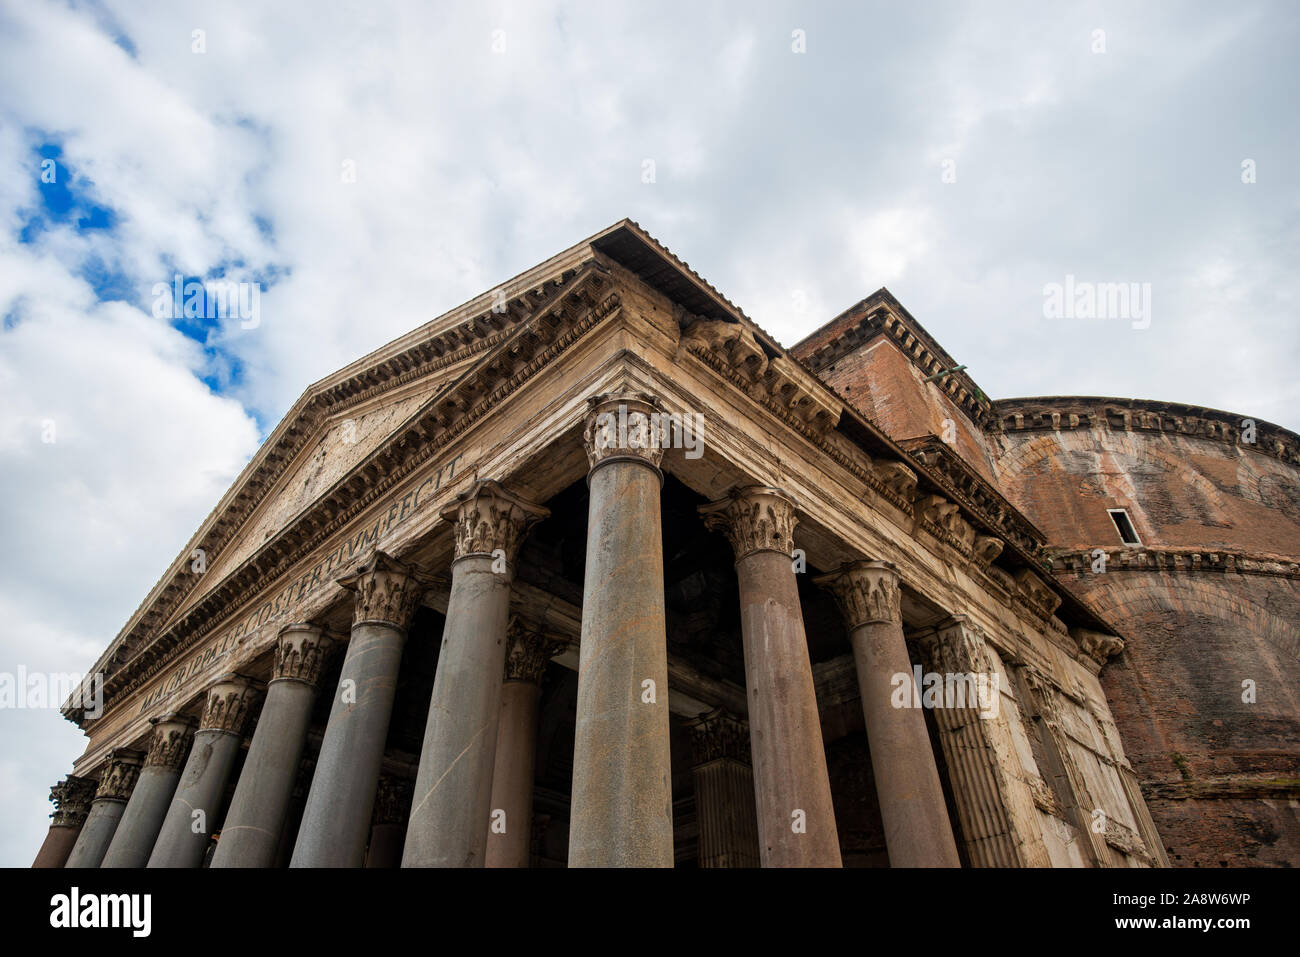 Pantheon in Rome, Italy on a cloudy day Stock Photo